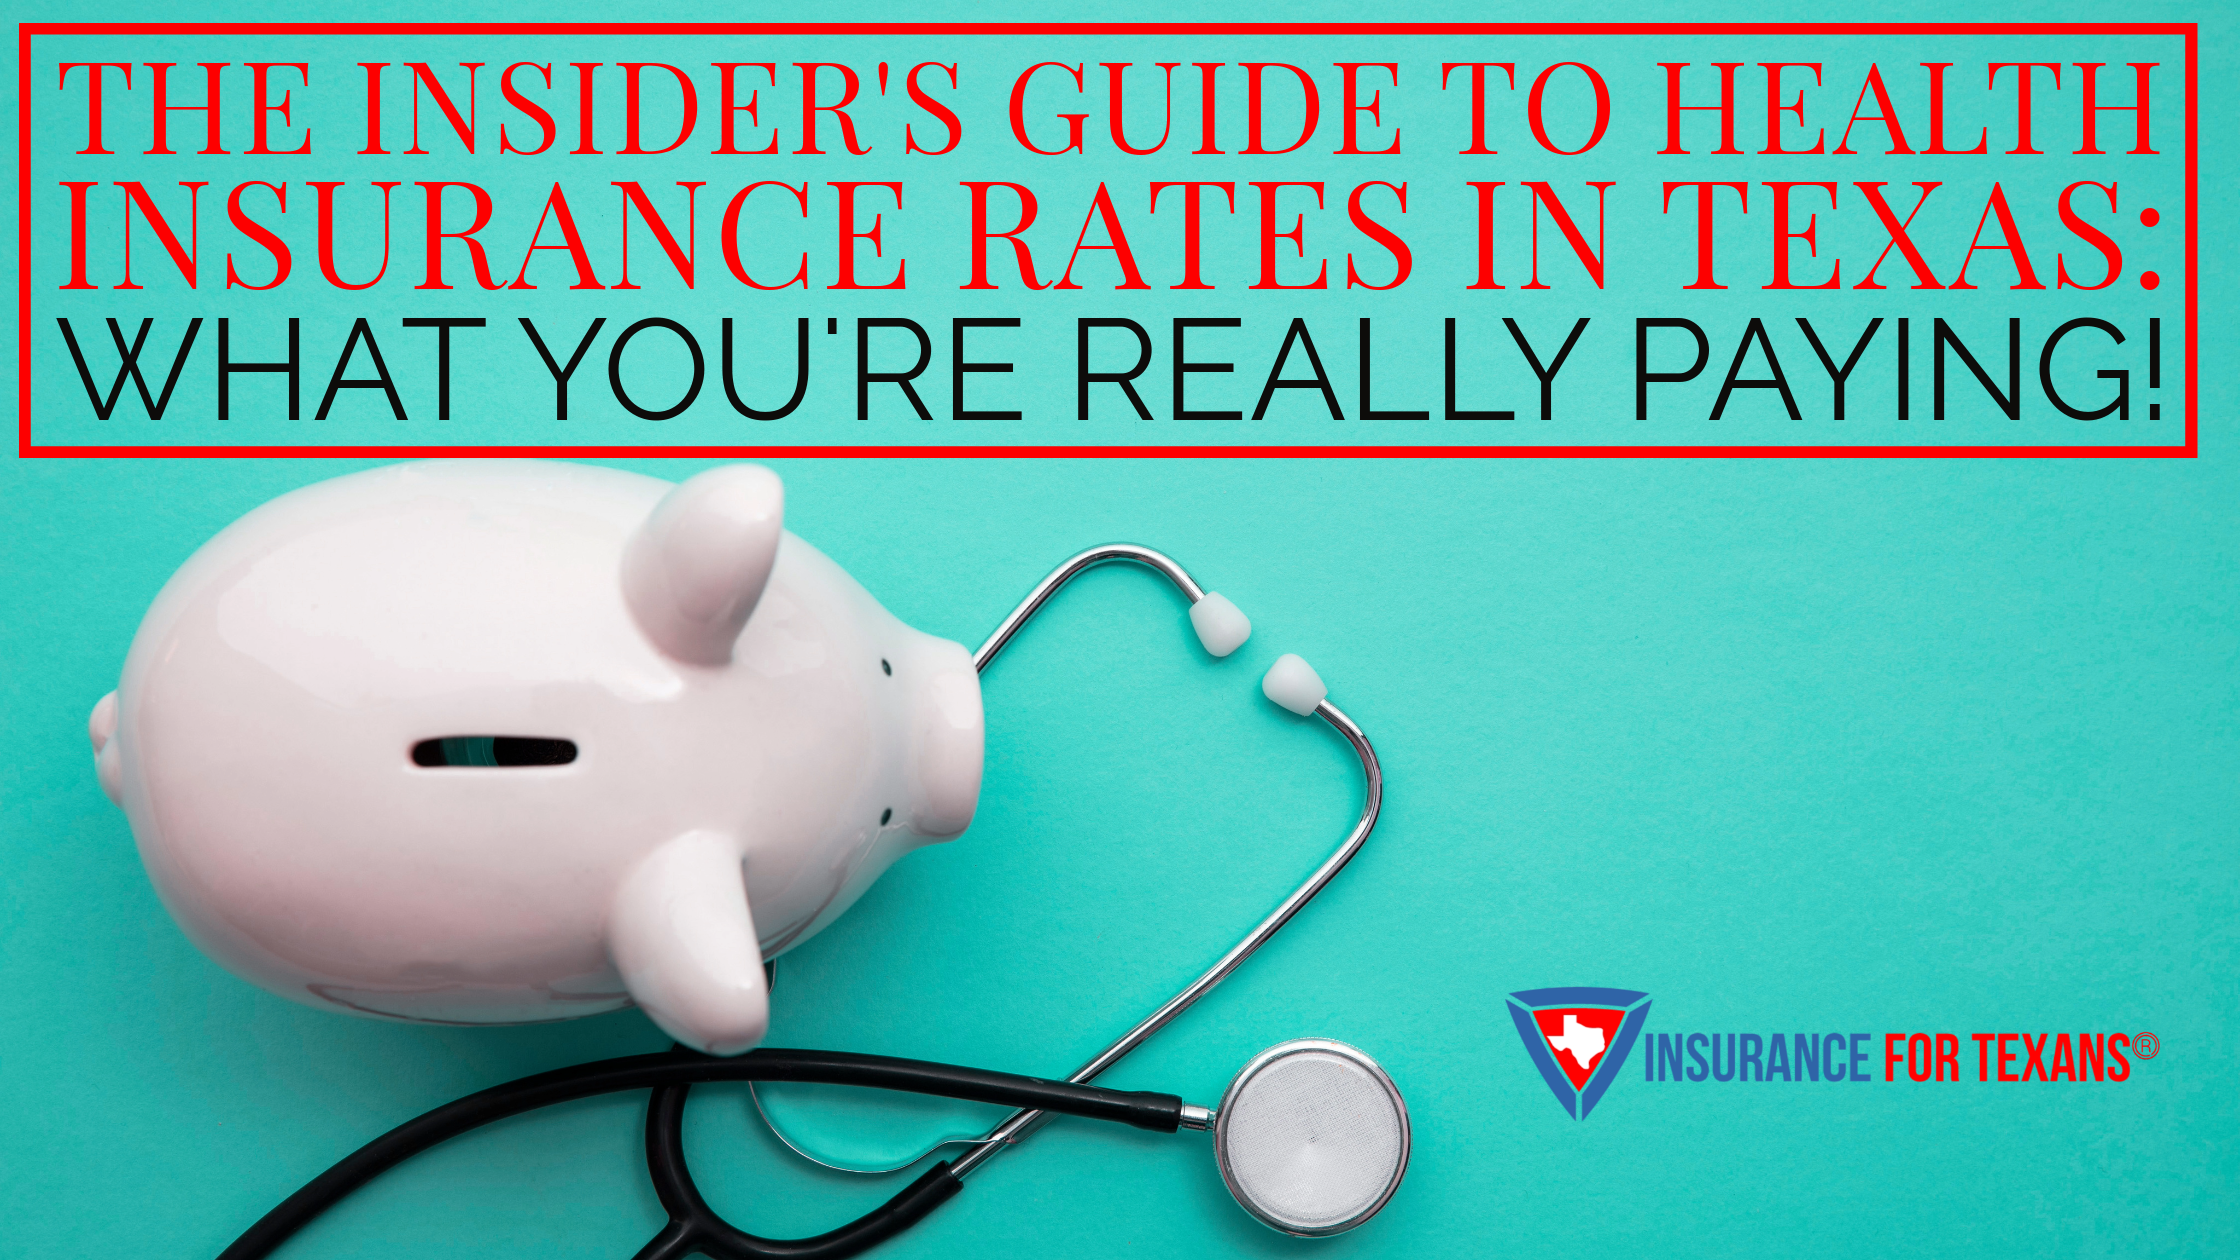 The Insider's Guide to Health Insurance Rates in Texas: What You're Really Paying